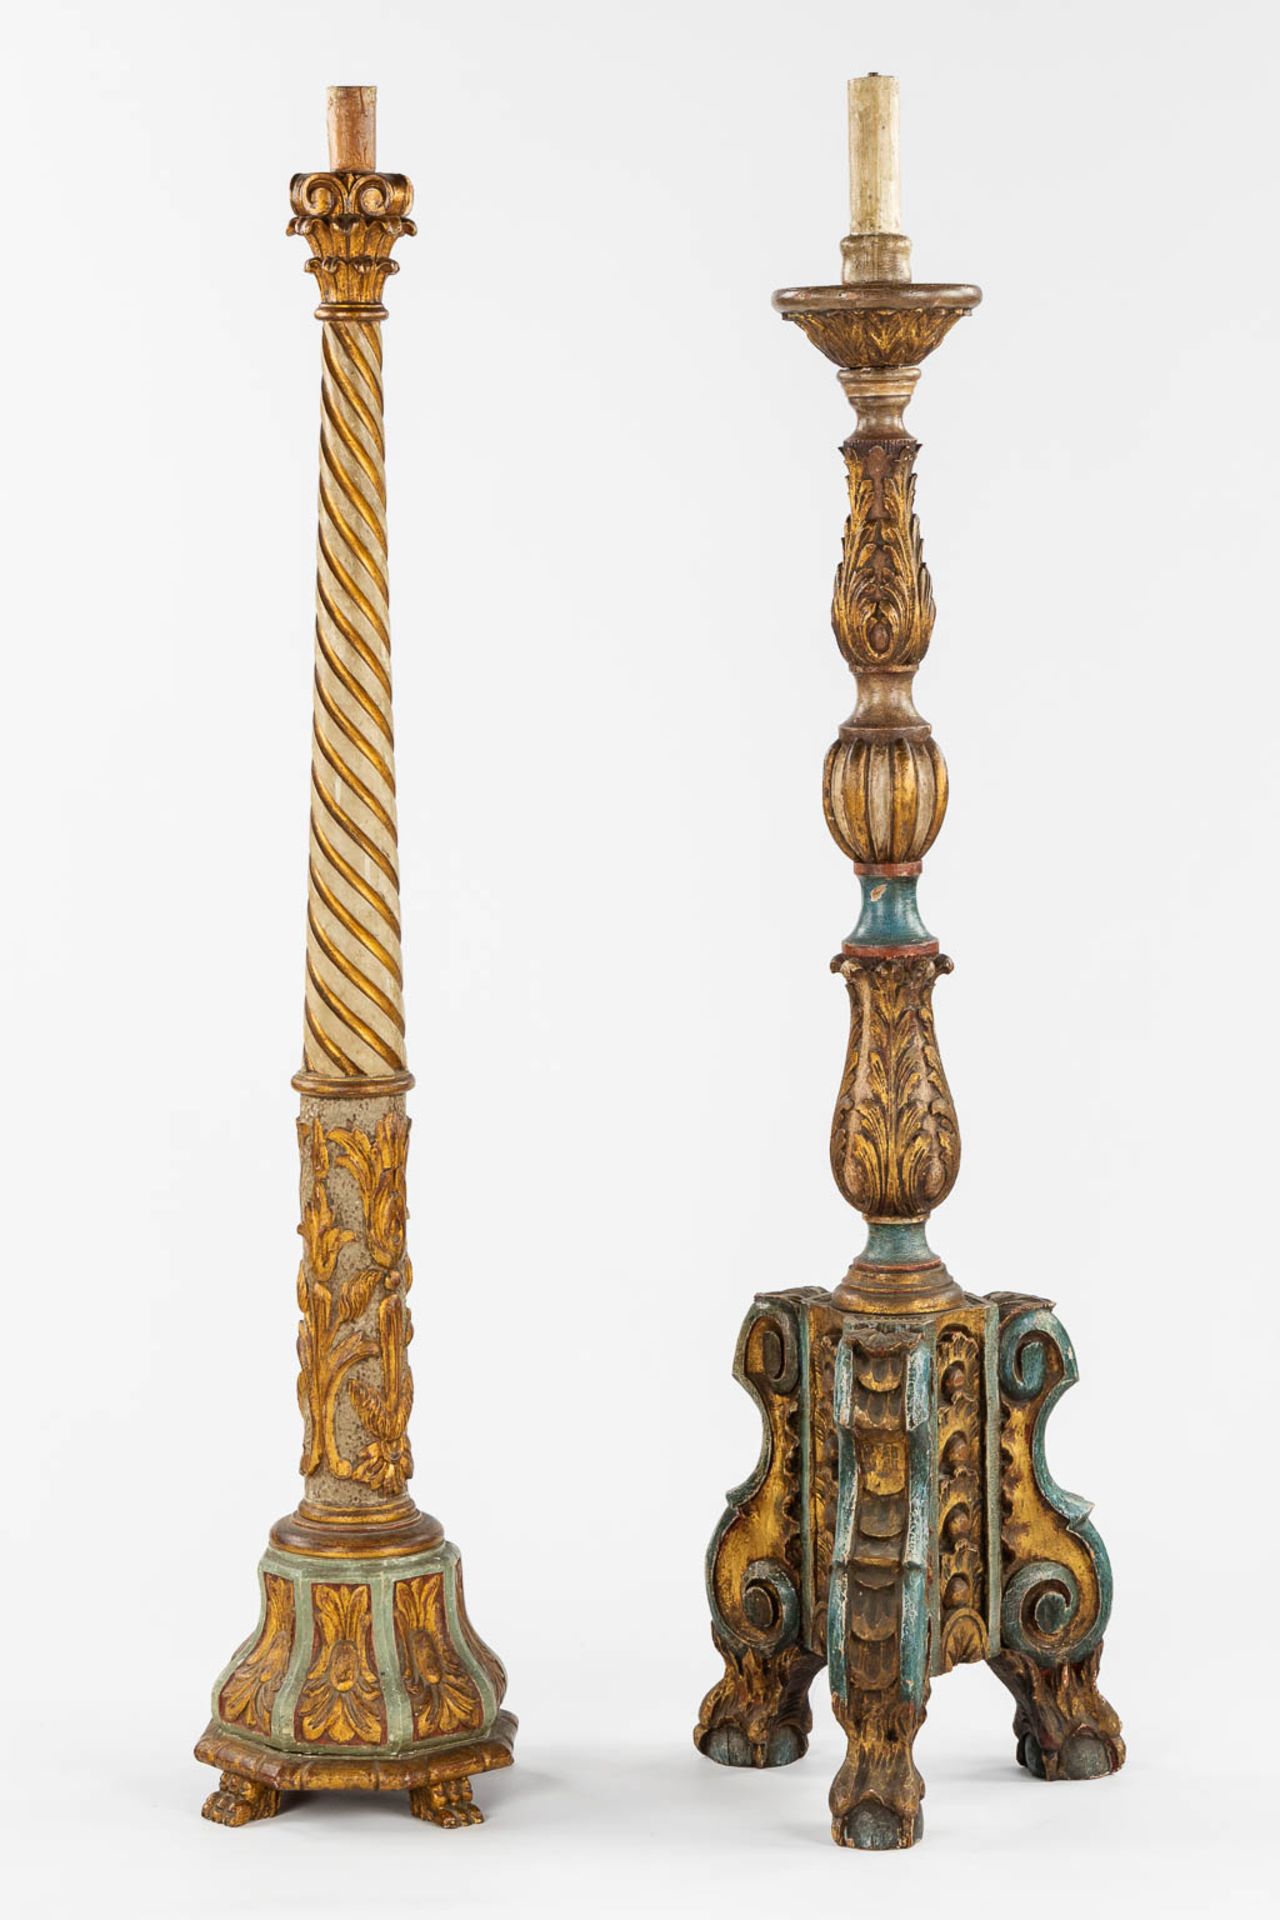 A pair of standing lamps, sculptured and patinated wood. Circa 1900. (H:144 cm) - Bild 4 aus 10